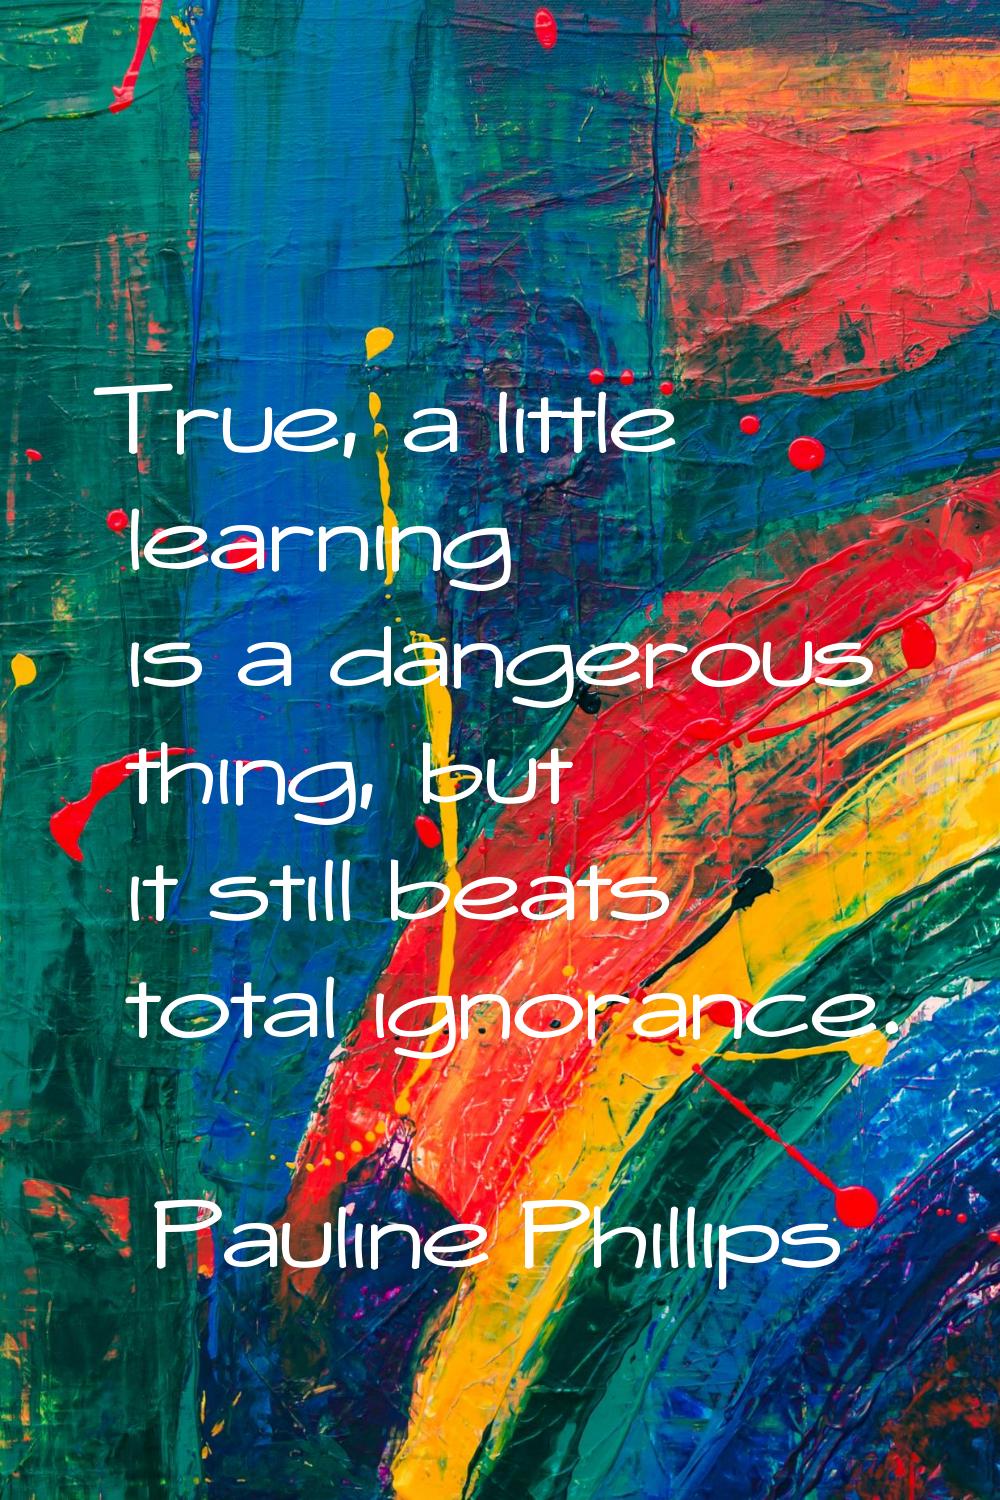 True, a little learning is a dangerous thing, but it still beats total ignorance.